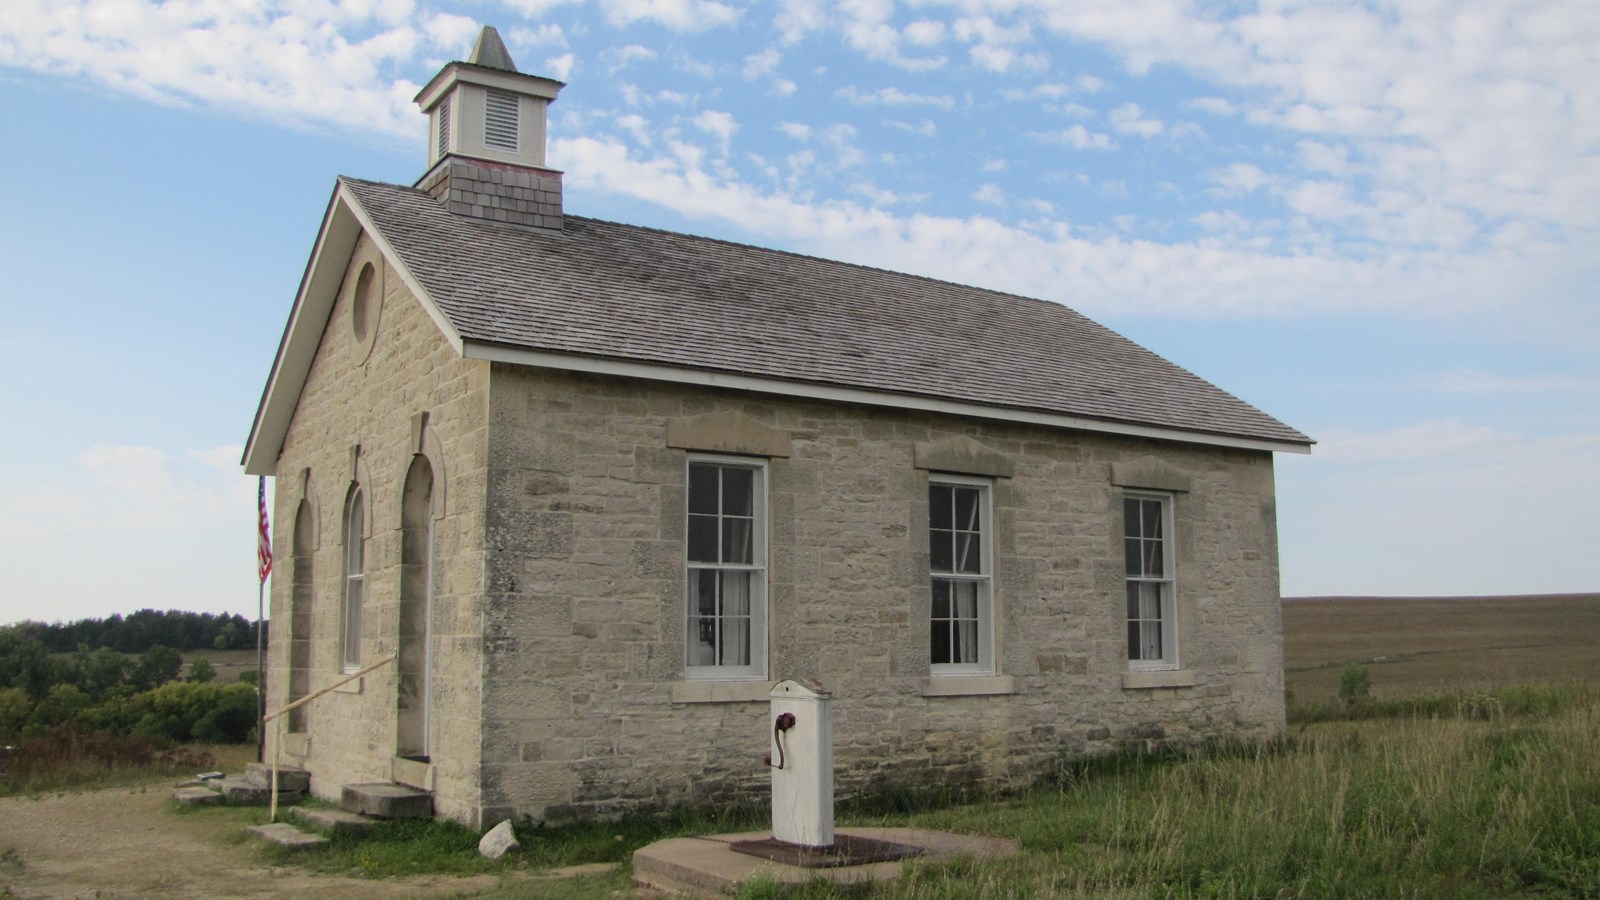 Lower Fox Creek School built of limestone with a wooden shake shingle roof and bellfry